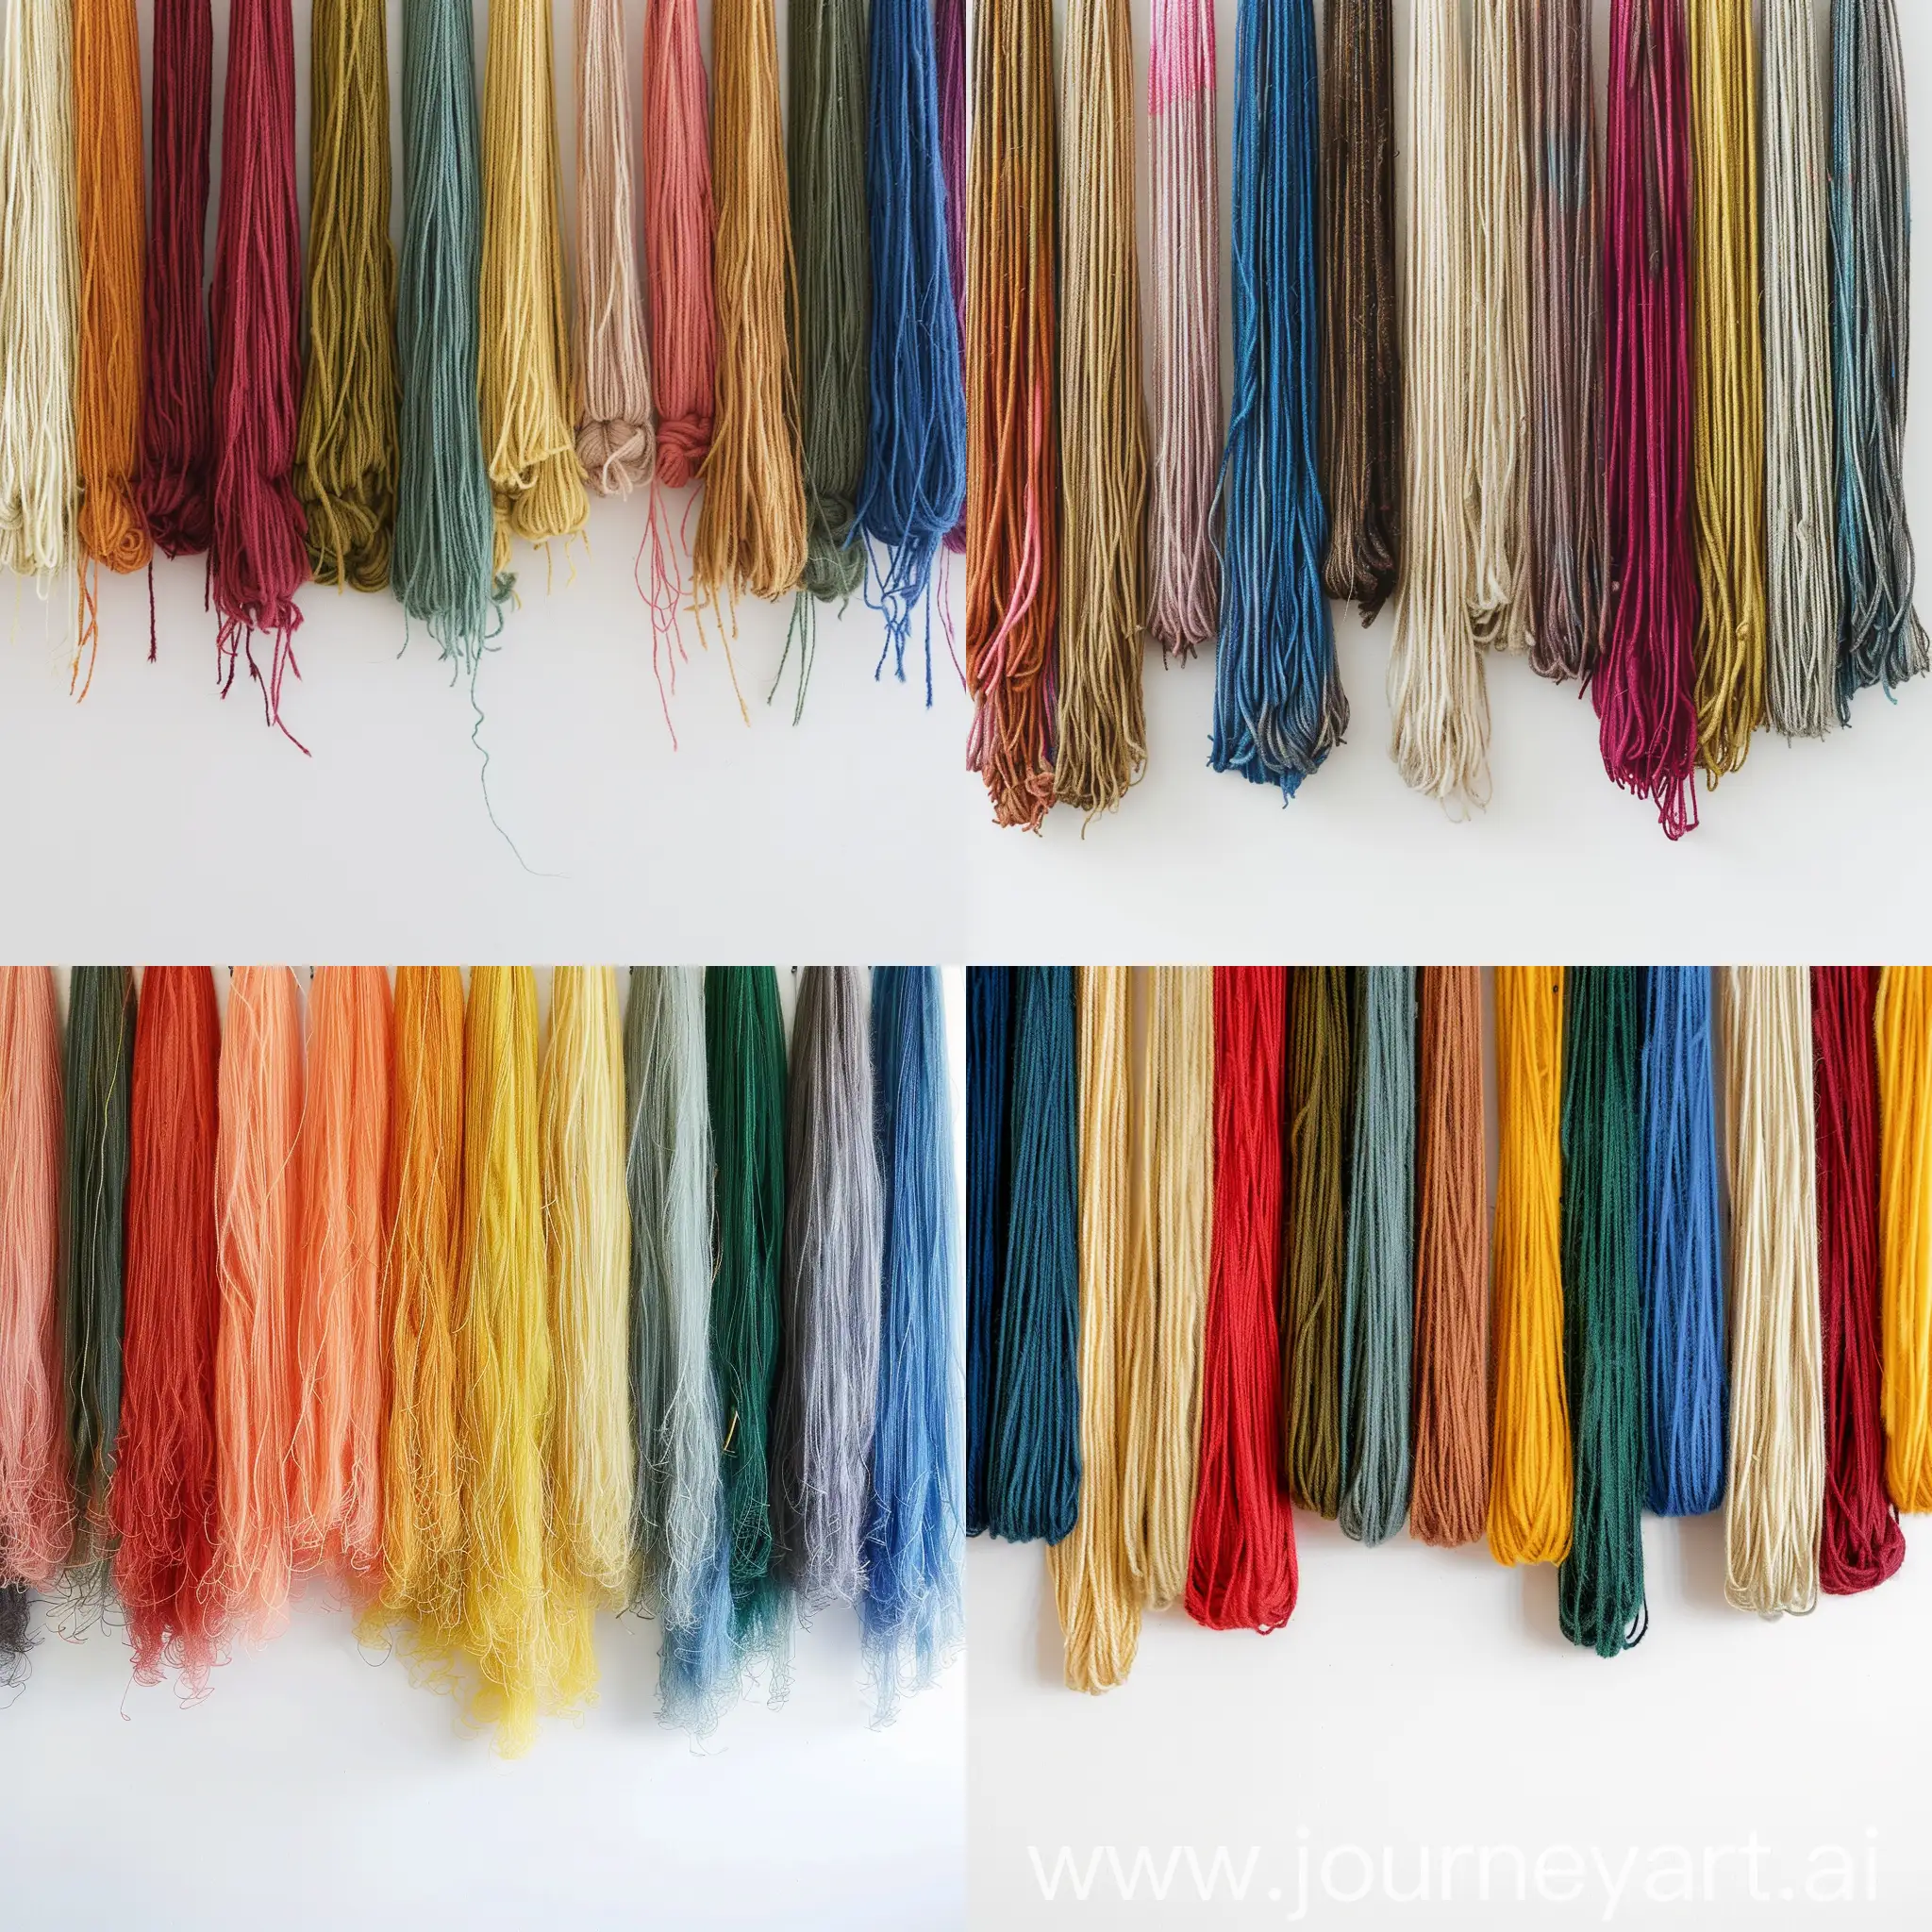 Colorful-Hanging-Wool-Threads-on-White-Background